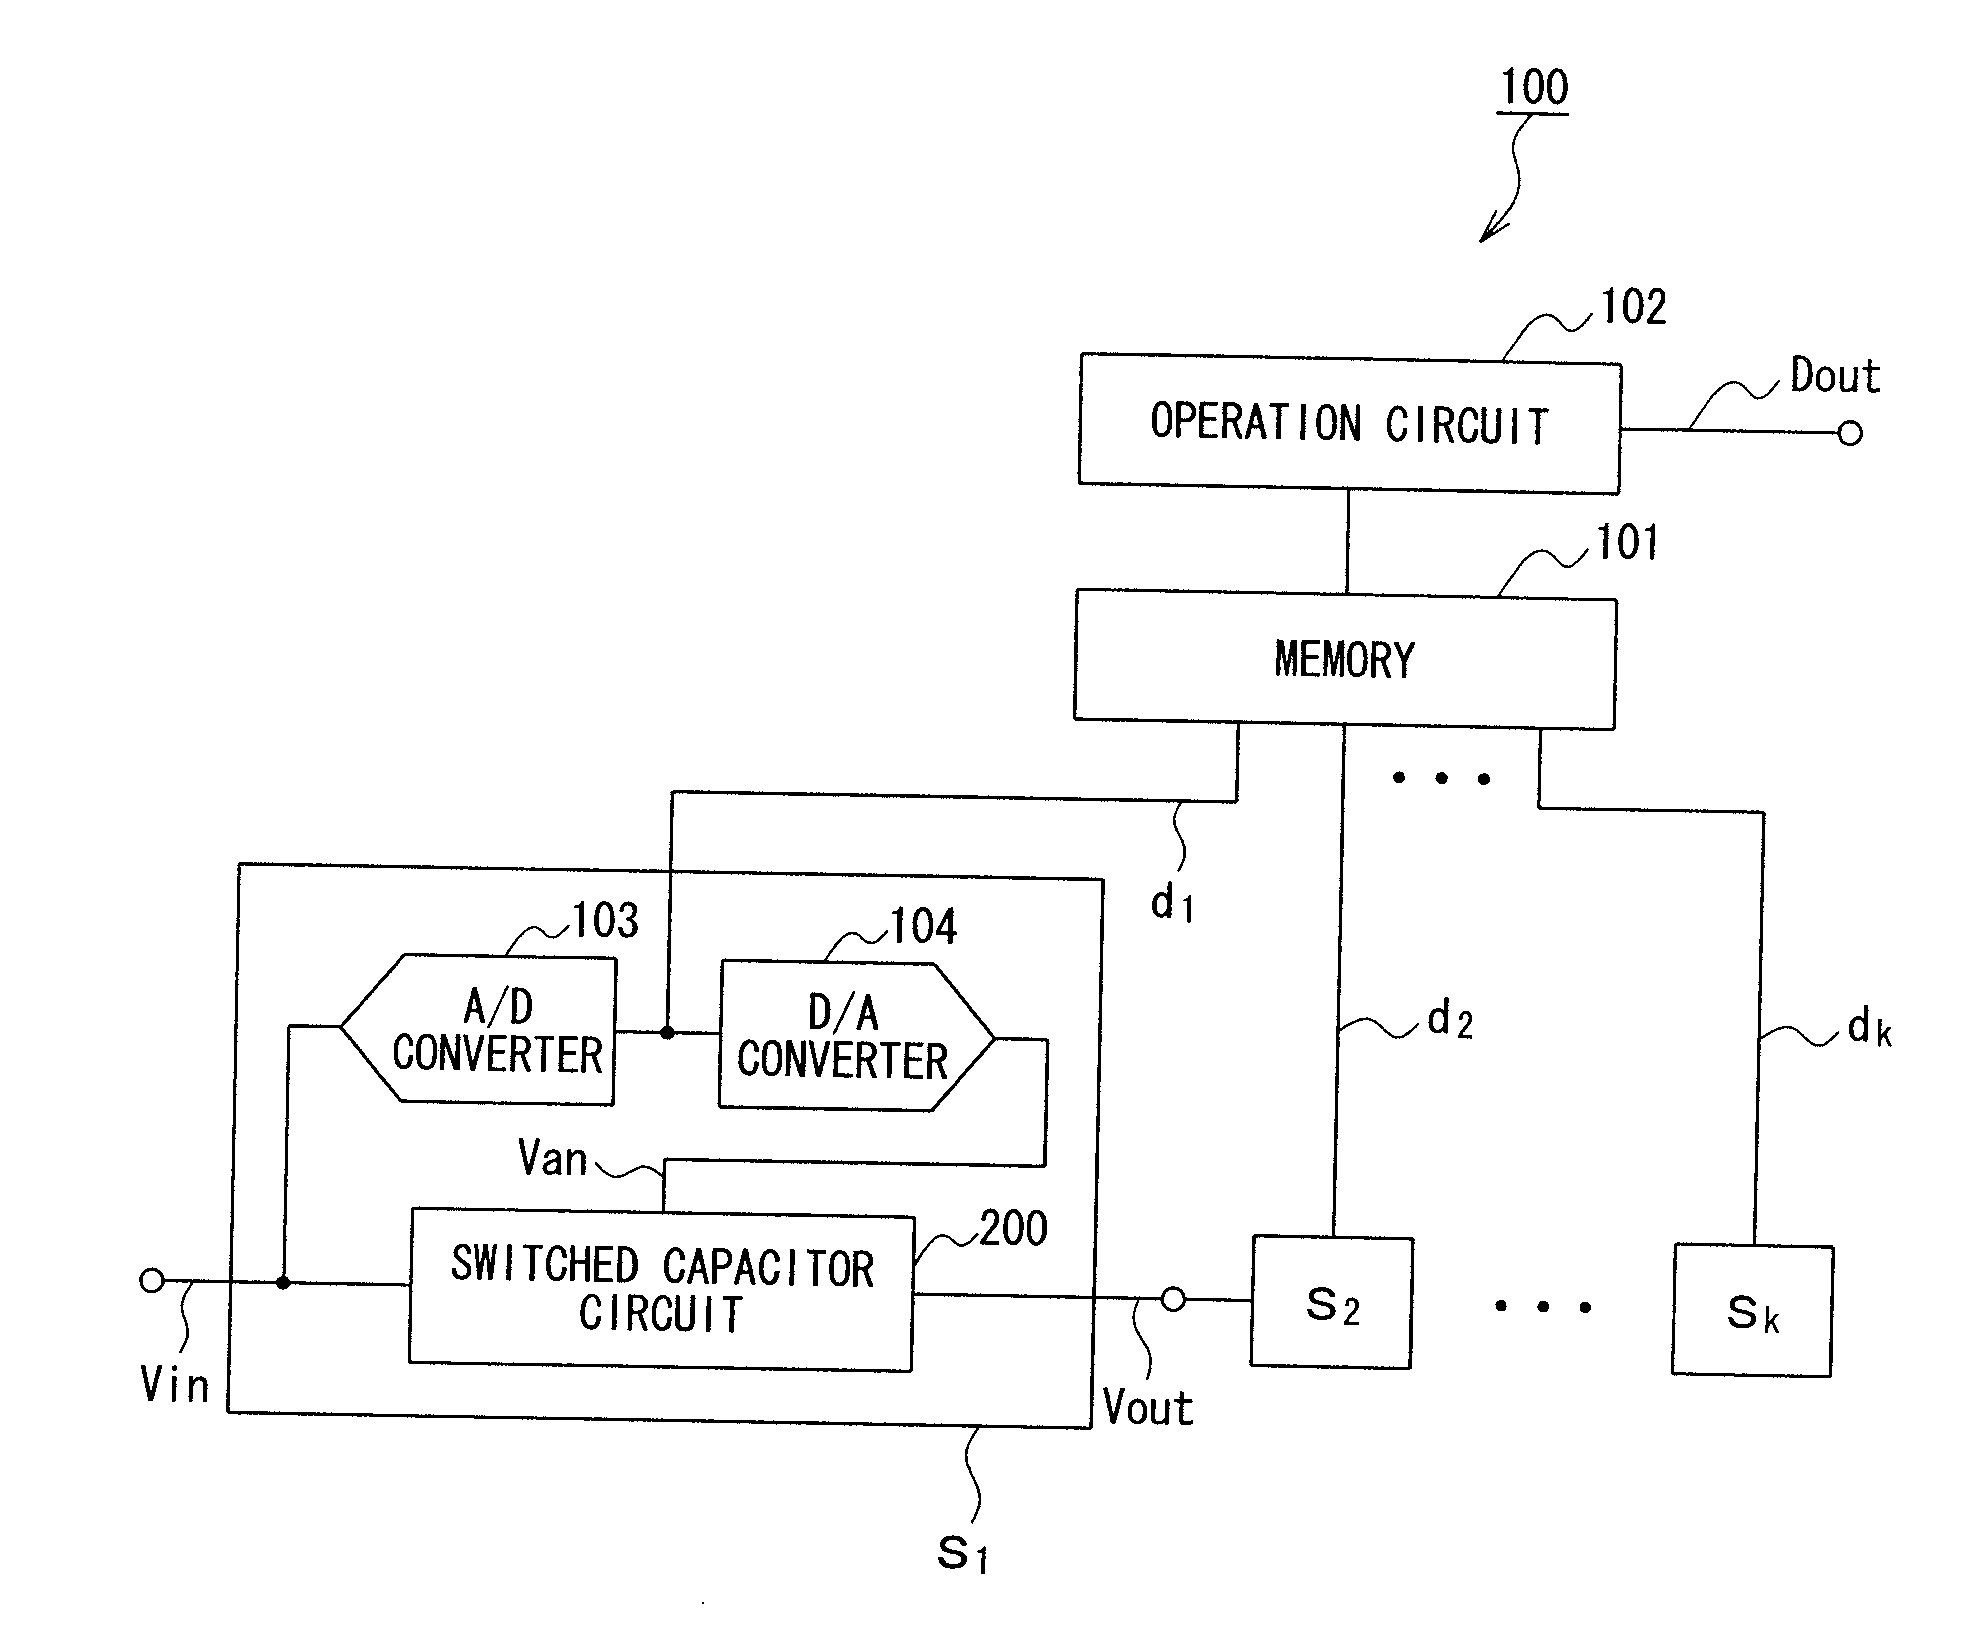 Switched capacitor circuit and pipeline a/d converter